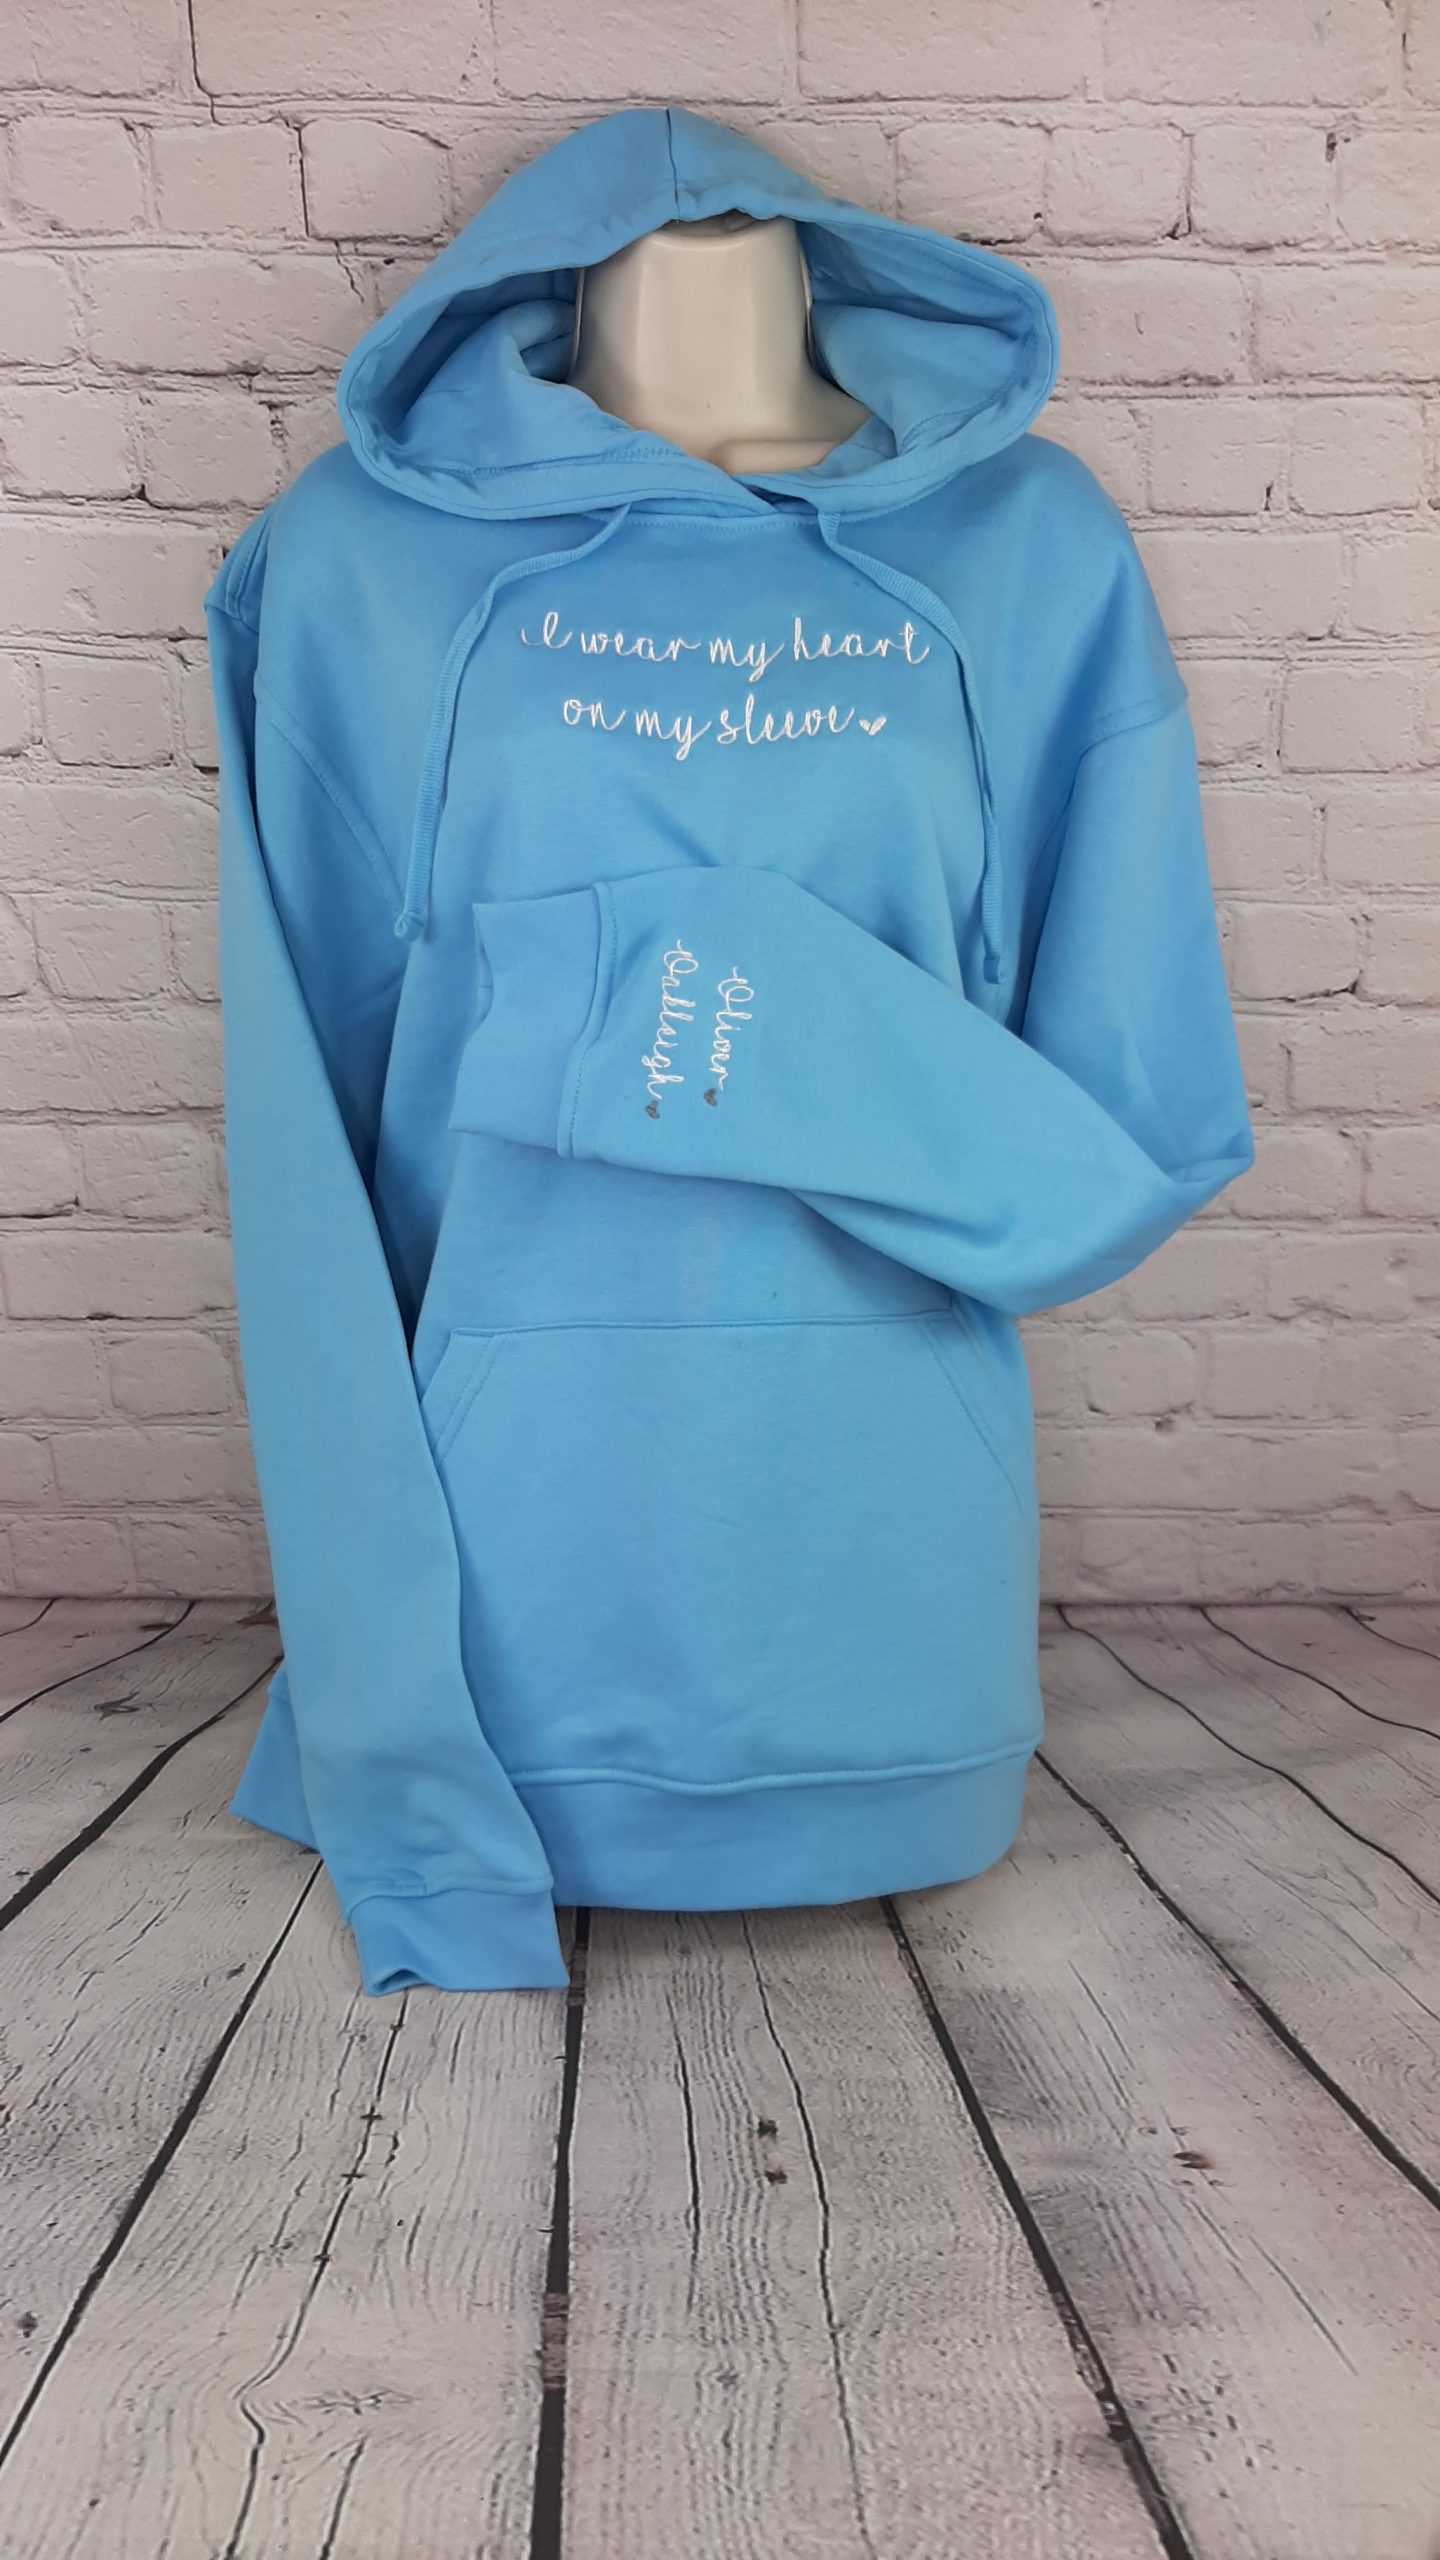 Heart on my Sleeve Hoodie, personalised mother day present of gift for mum gift for her, embroidered with names and hearts on sleeve.